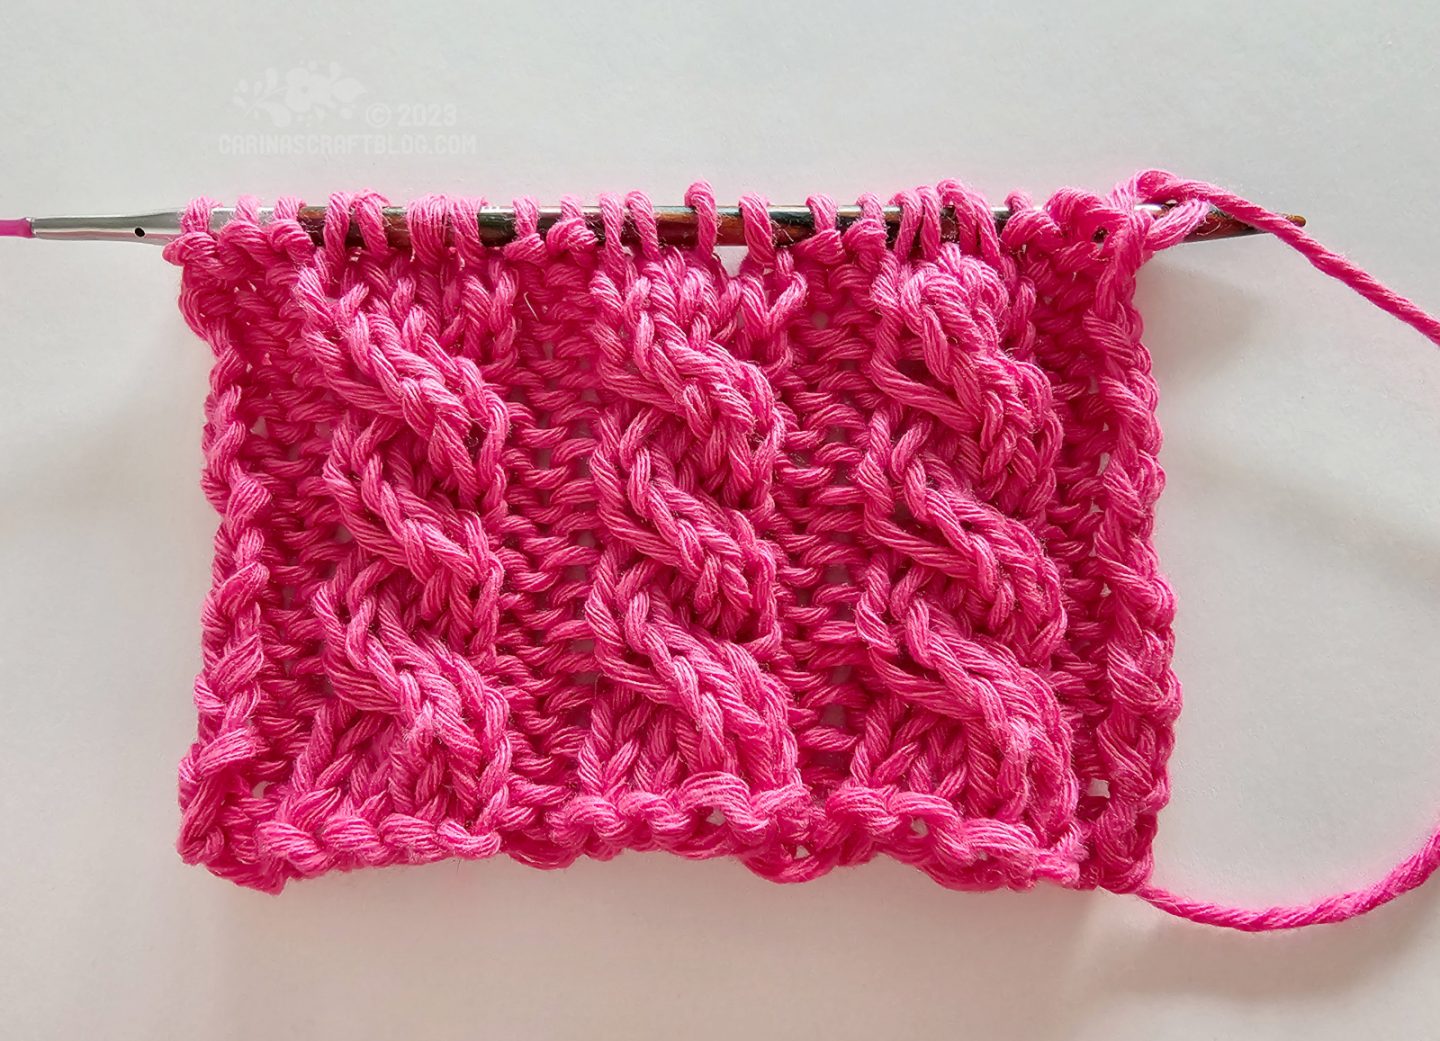 Overhead view of a short piece of knitting with a cabled pattern using hot pink year.